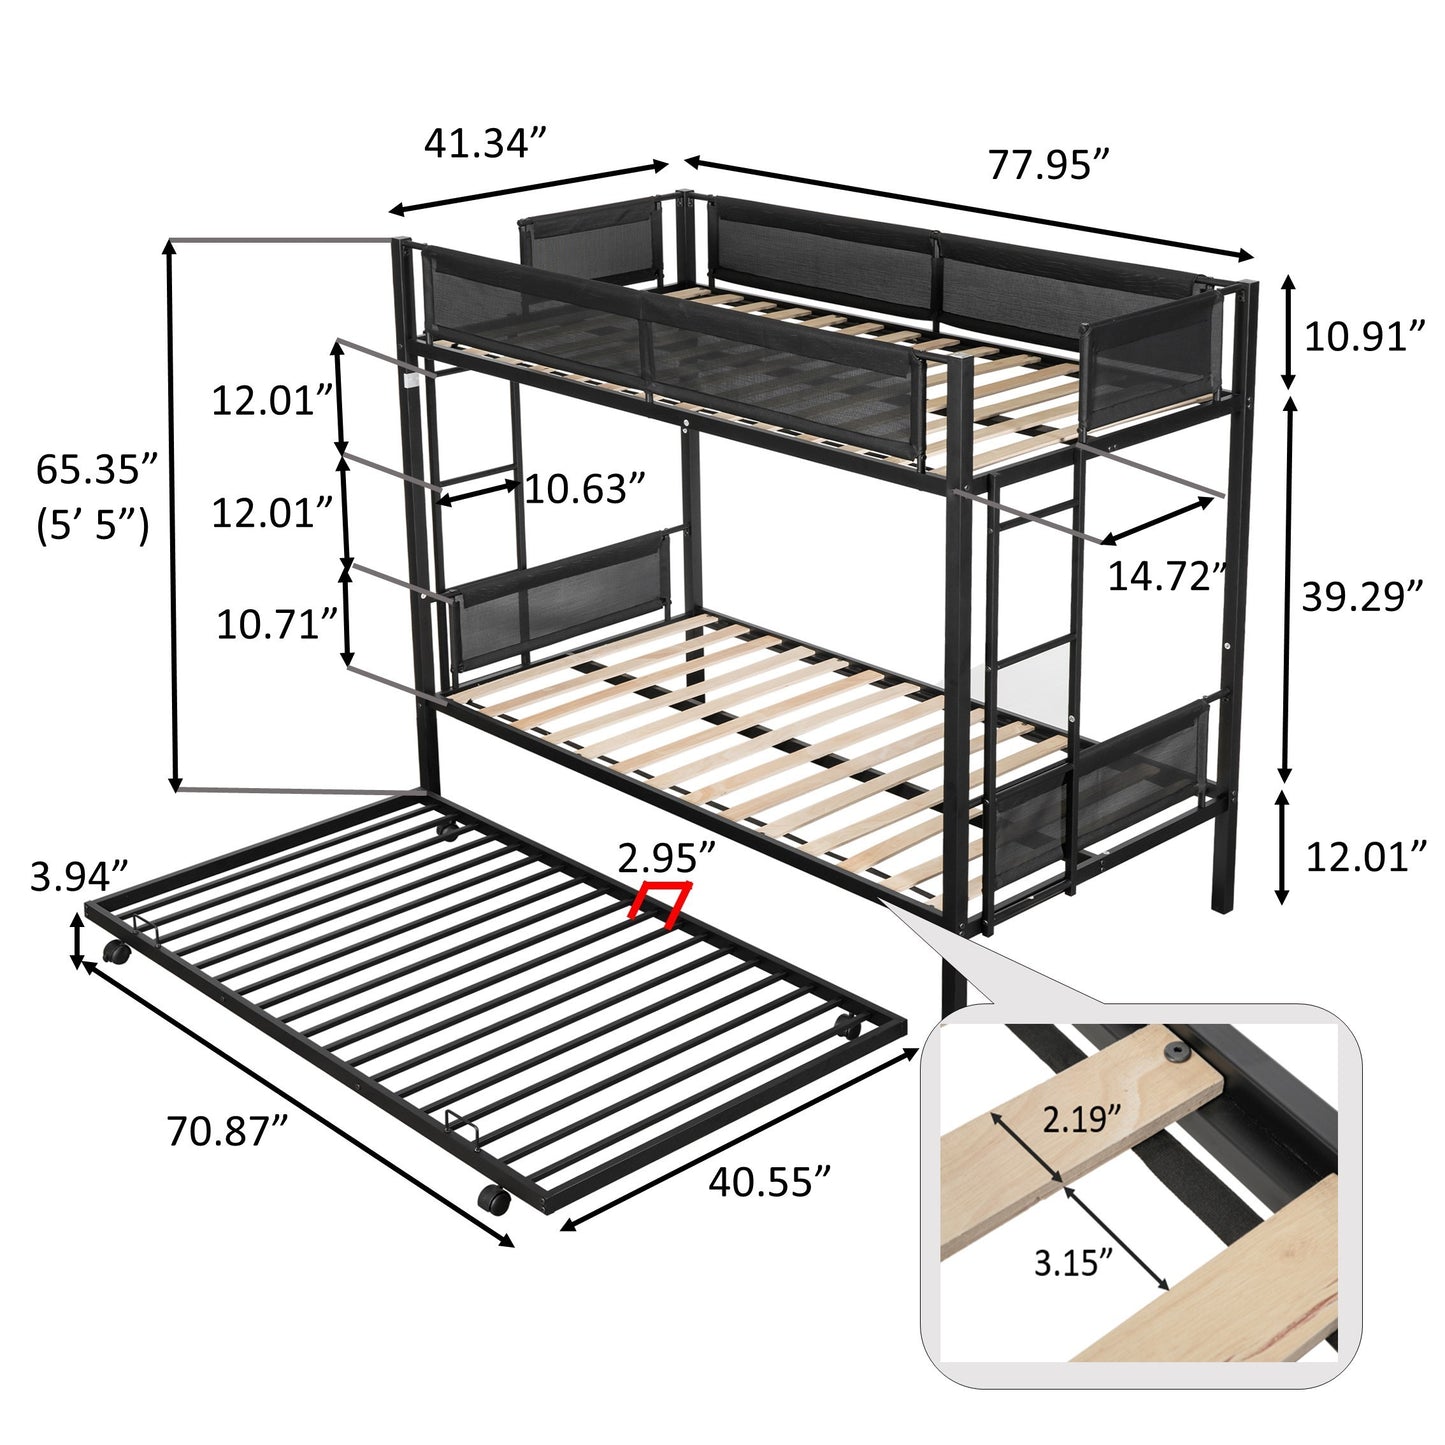 Metal Twin over twin bunk bed with Trundle/ Sturdy Metal Frame/ Noise-Free Wood Slats/ Comfortable Textilene Guardrail/ 2 side Ladders/ Space-Saving Trundle/ Bunk Bed for Three/ No Box Spring Needed